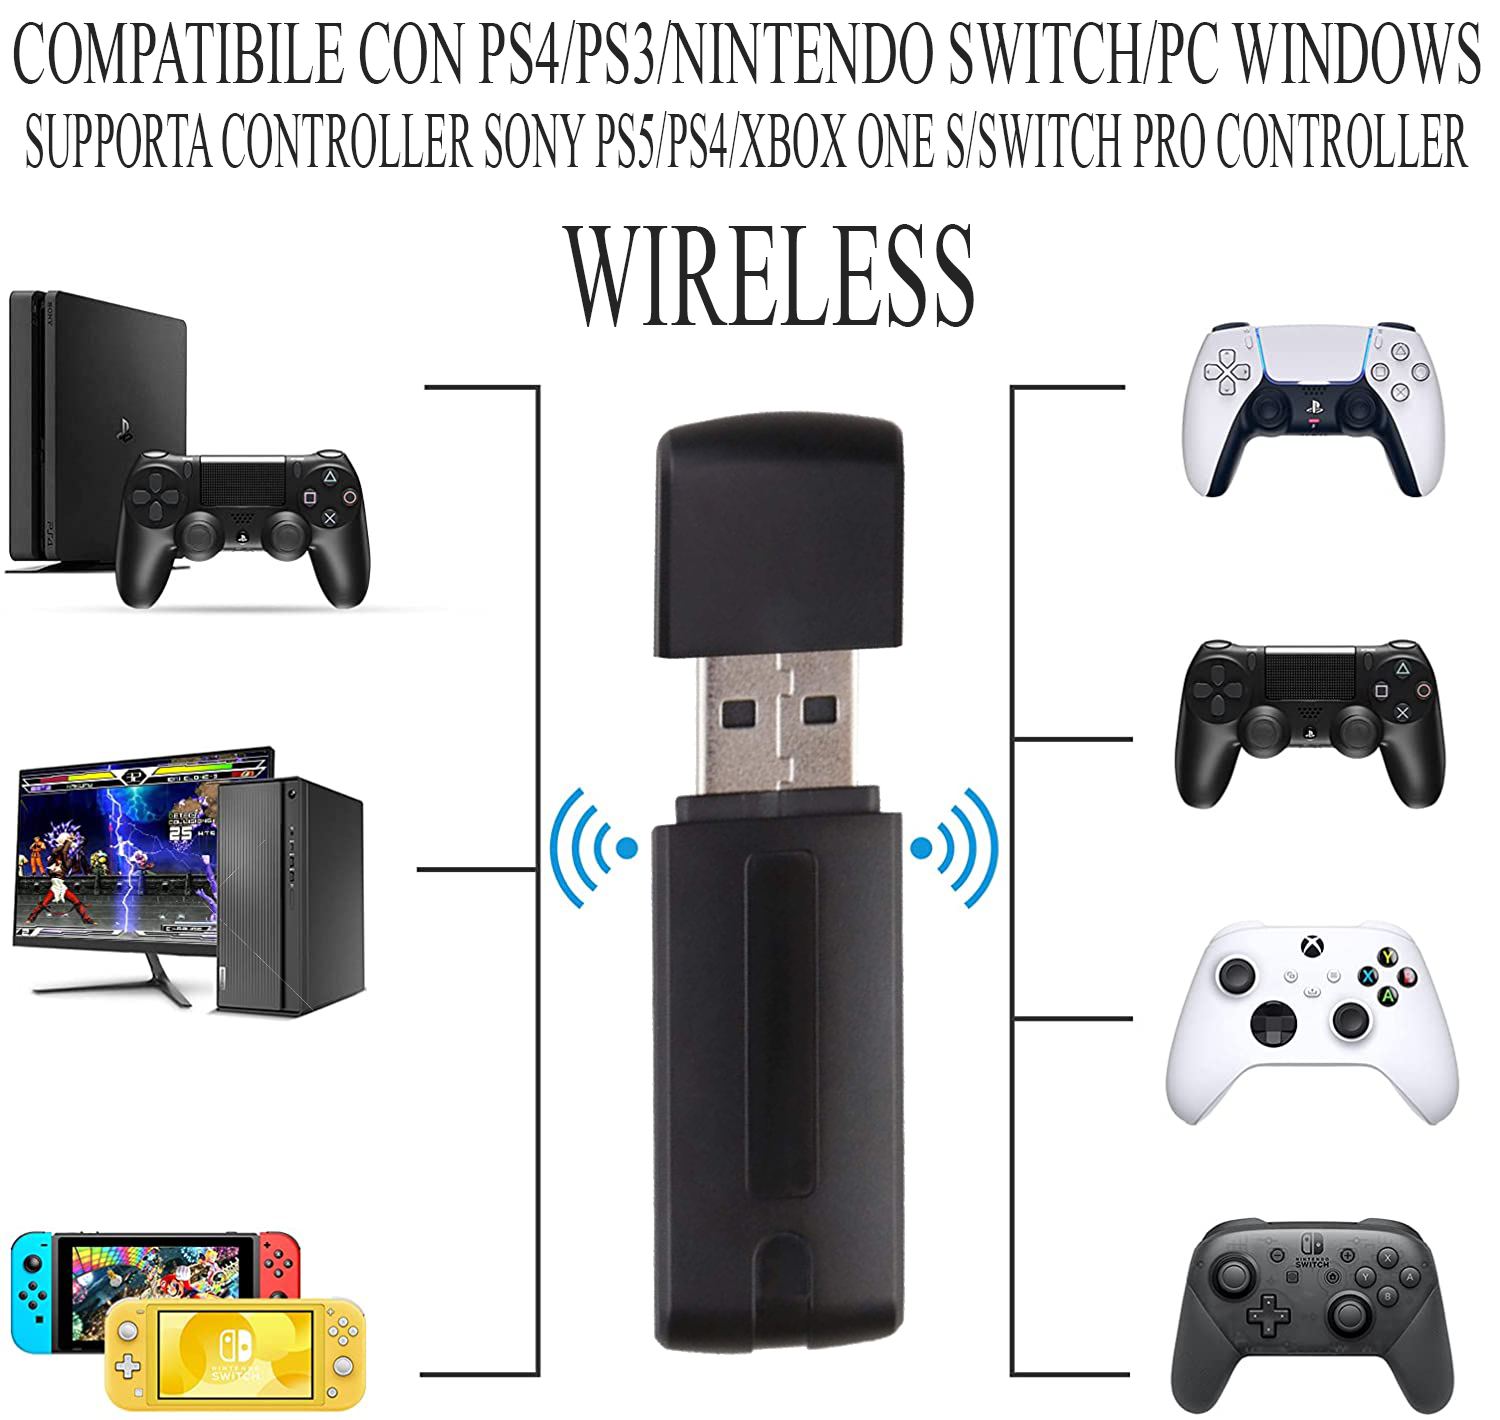 PENNA WIRELESS USB PER PS4/PS3/XBOX ONE/NINTENDO SWITCH/PC PER CONTROLLER PS5 PS4 XBOX ONE